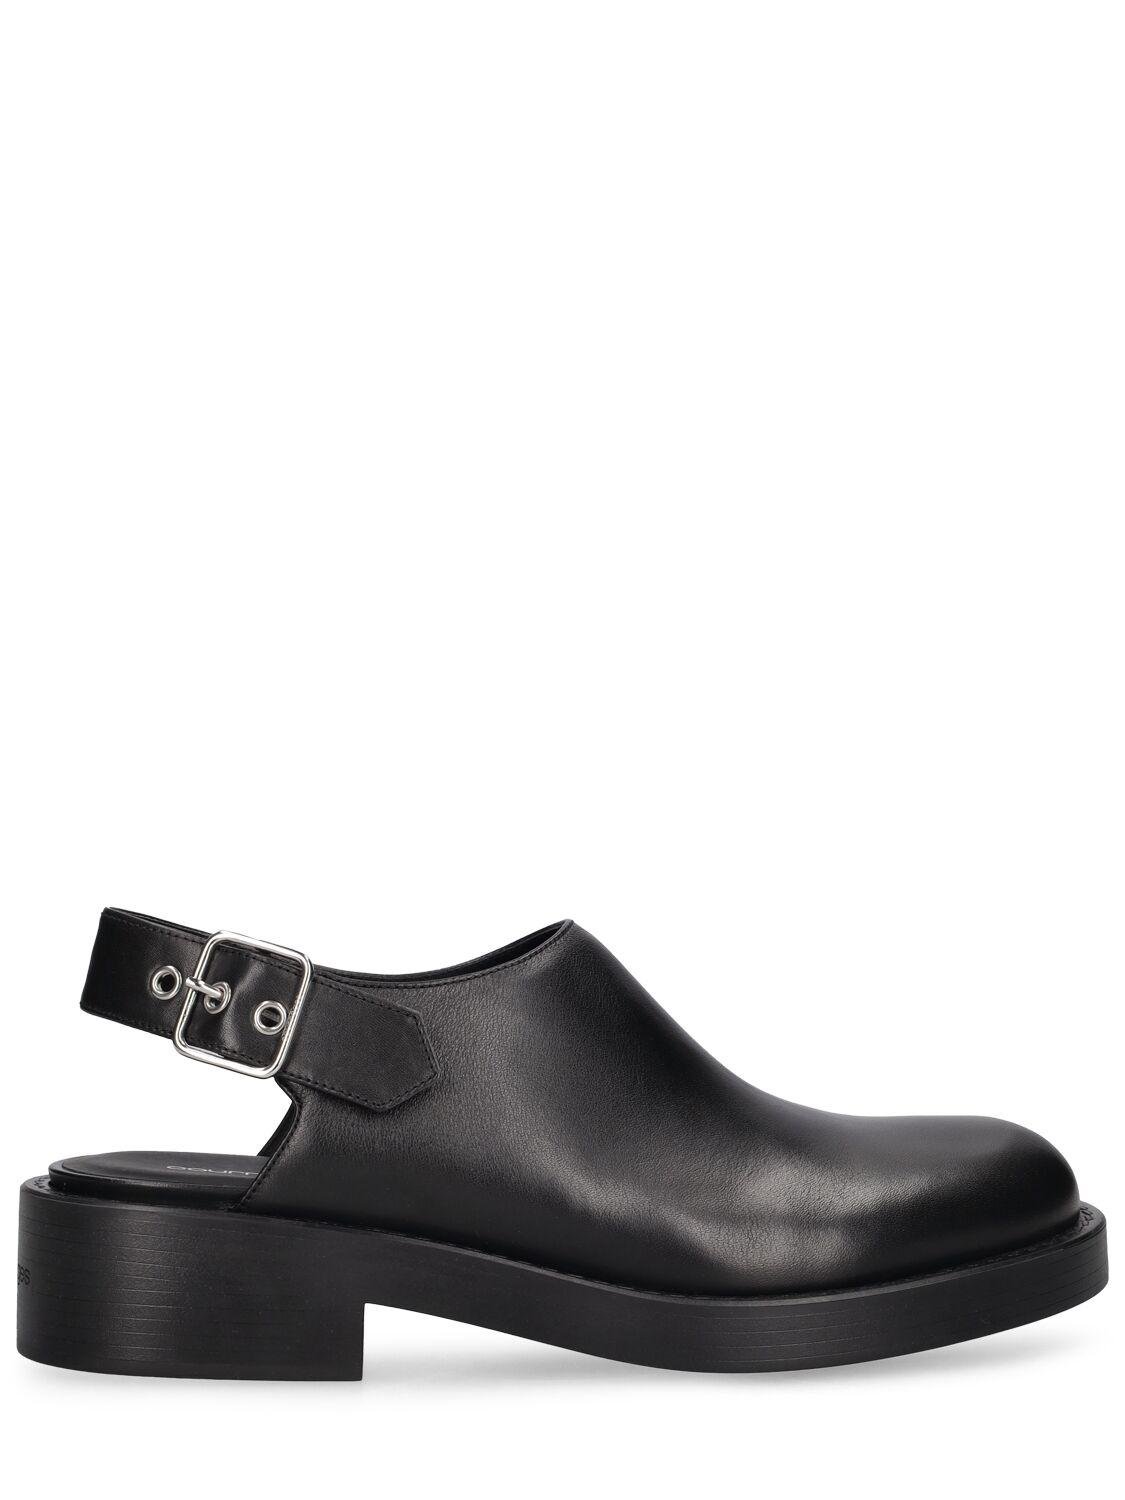 Gogo Leather Clogs by COURREGES